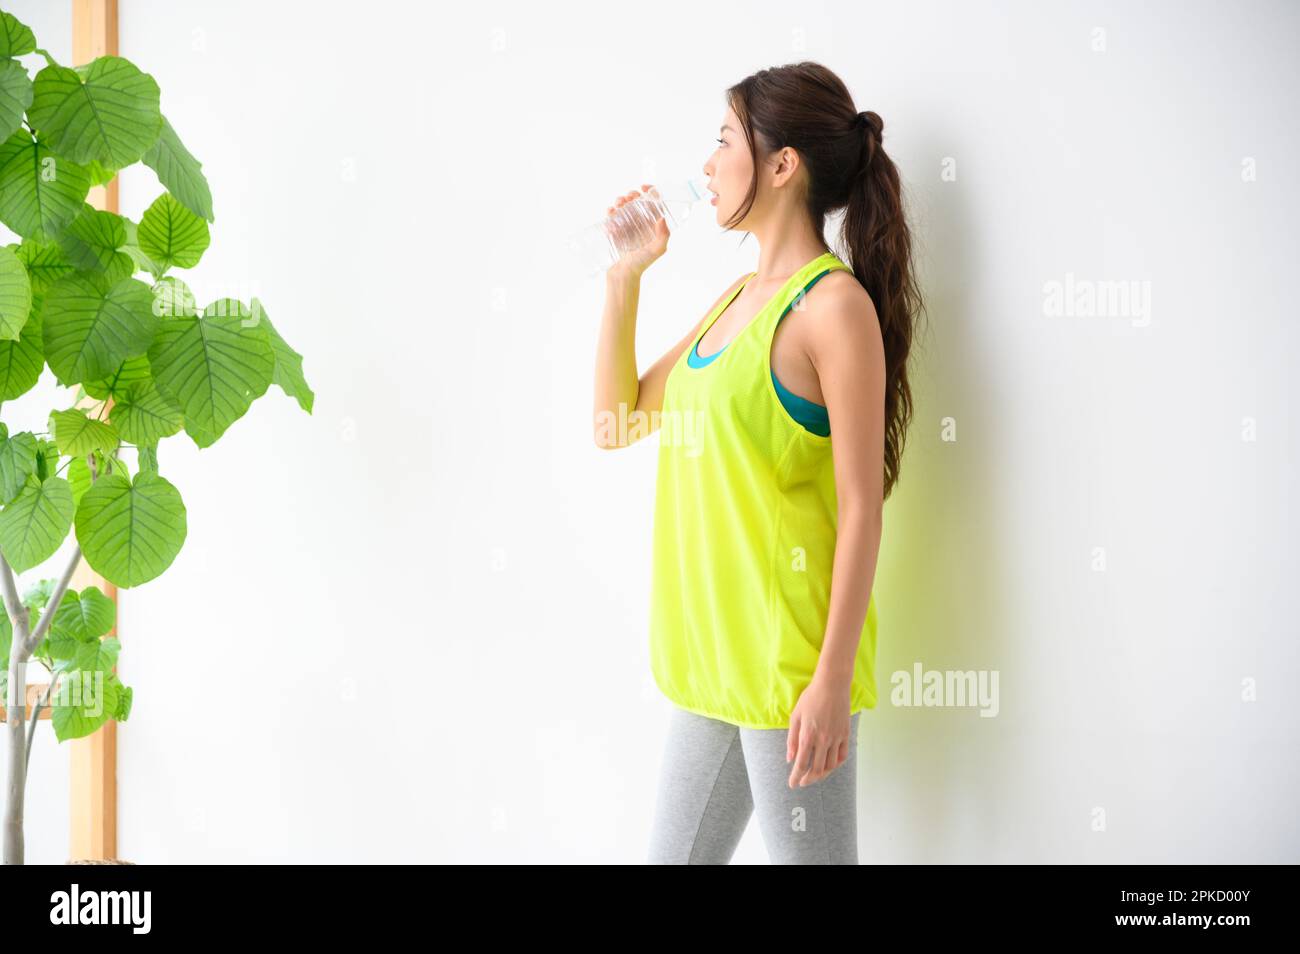 Woman Drinking Bottled Water Stock Photo